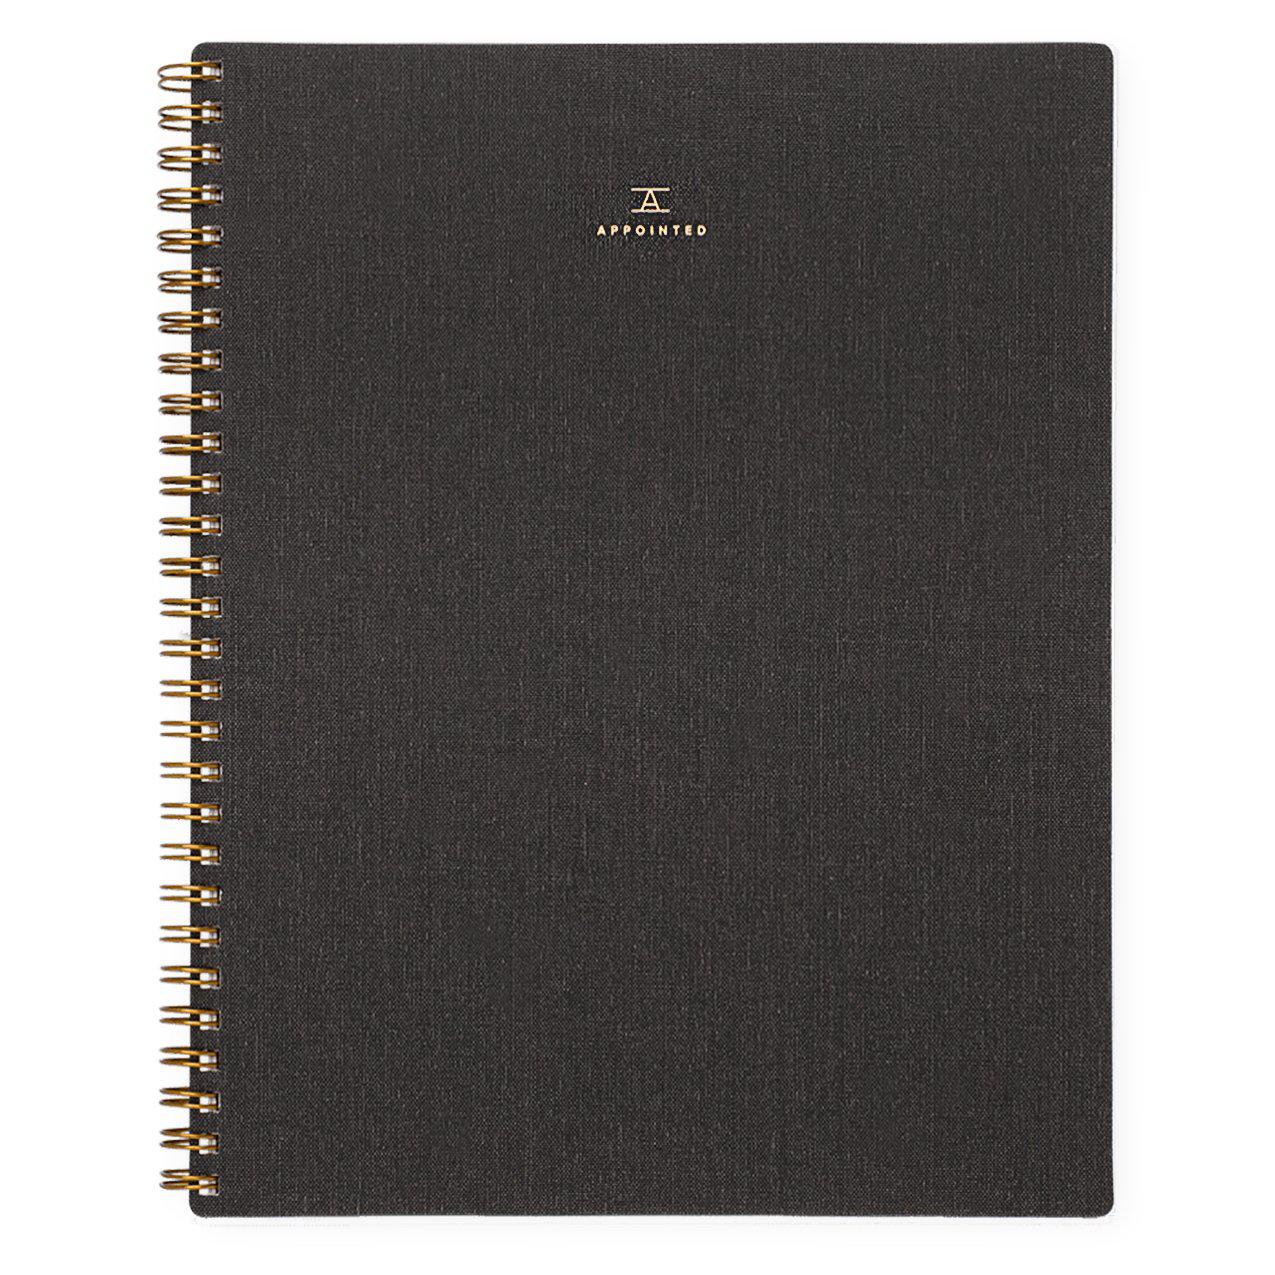 Appointed Charcoal Grey Notebook | Lined or Grid 